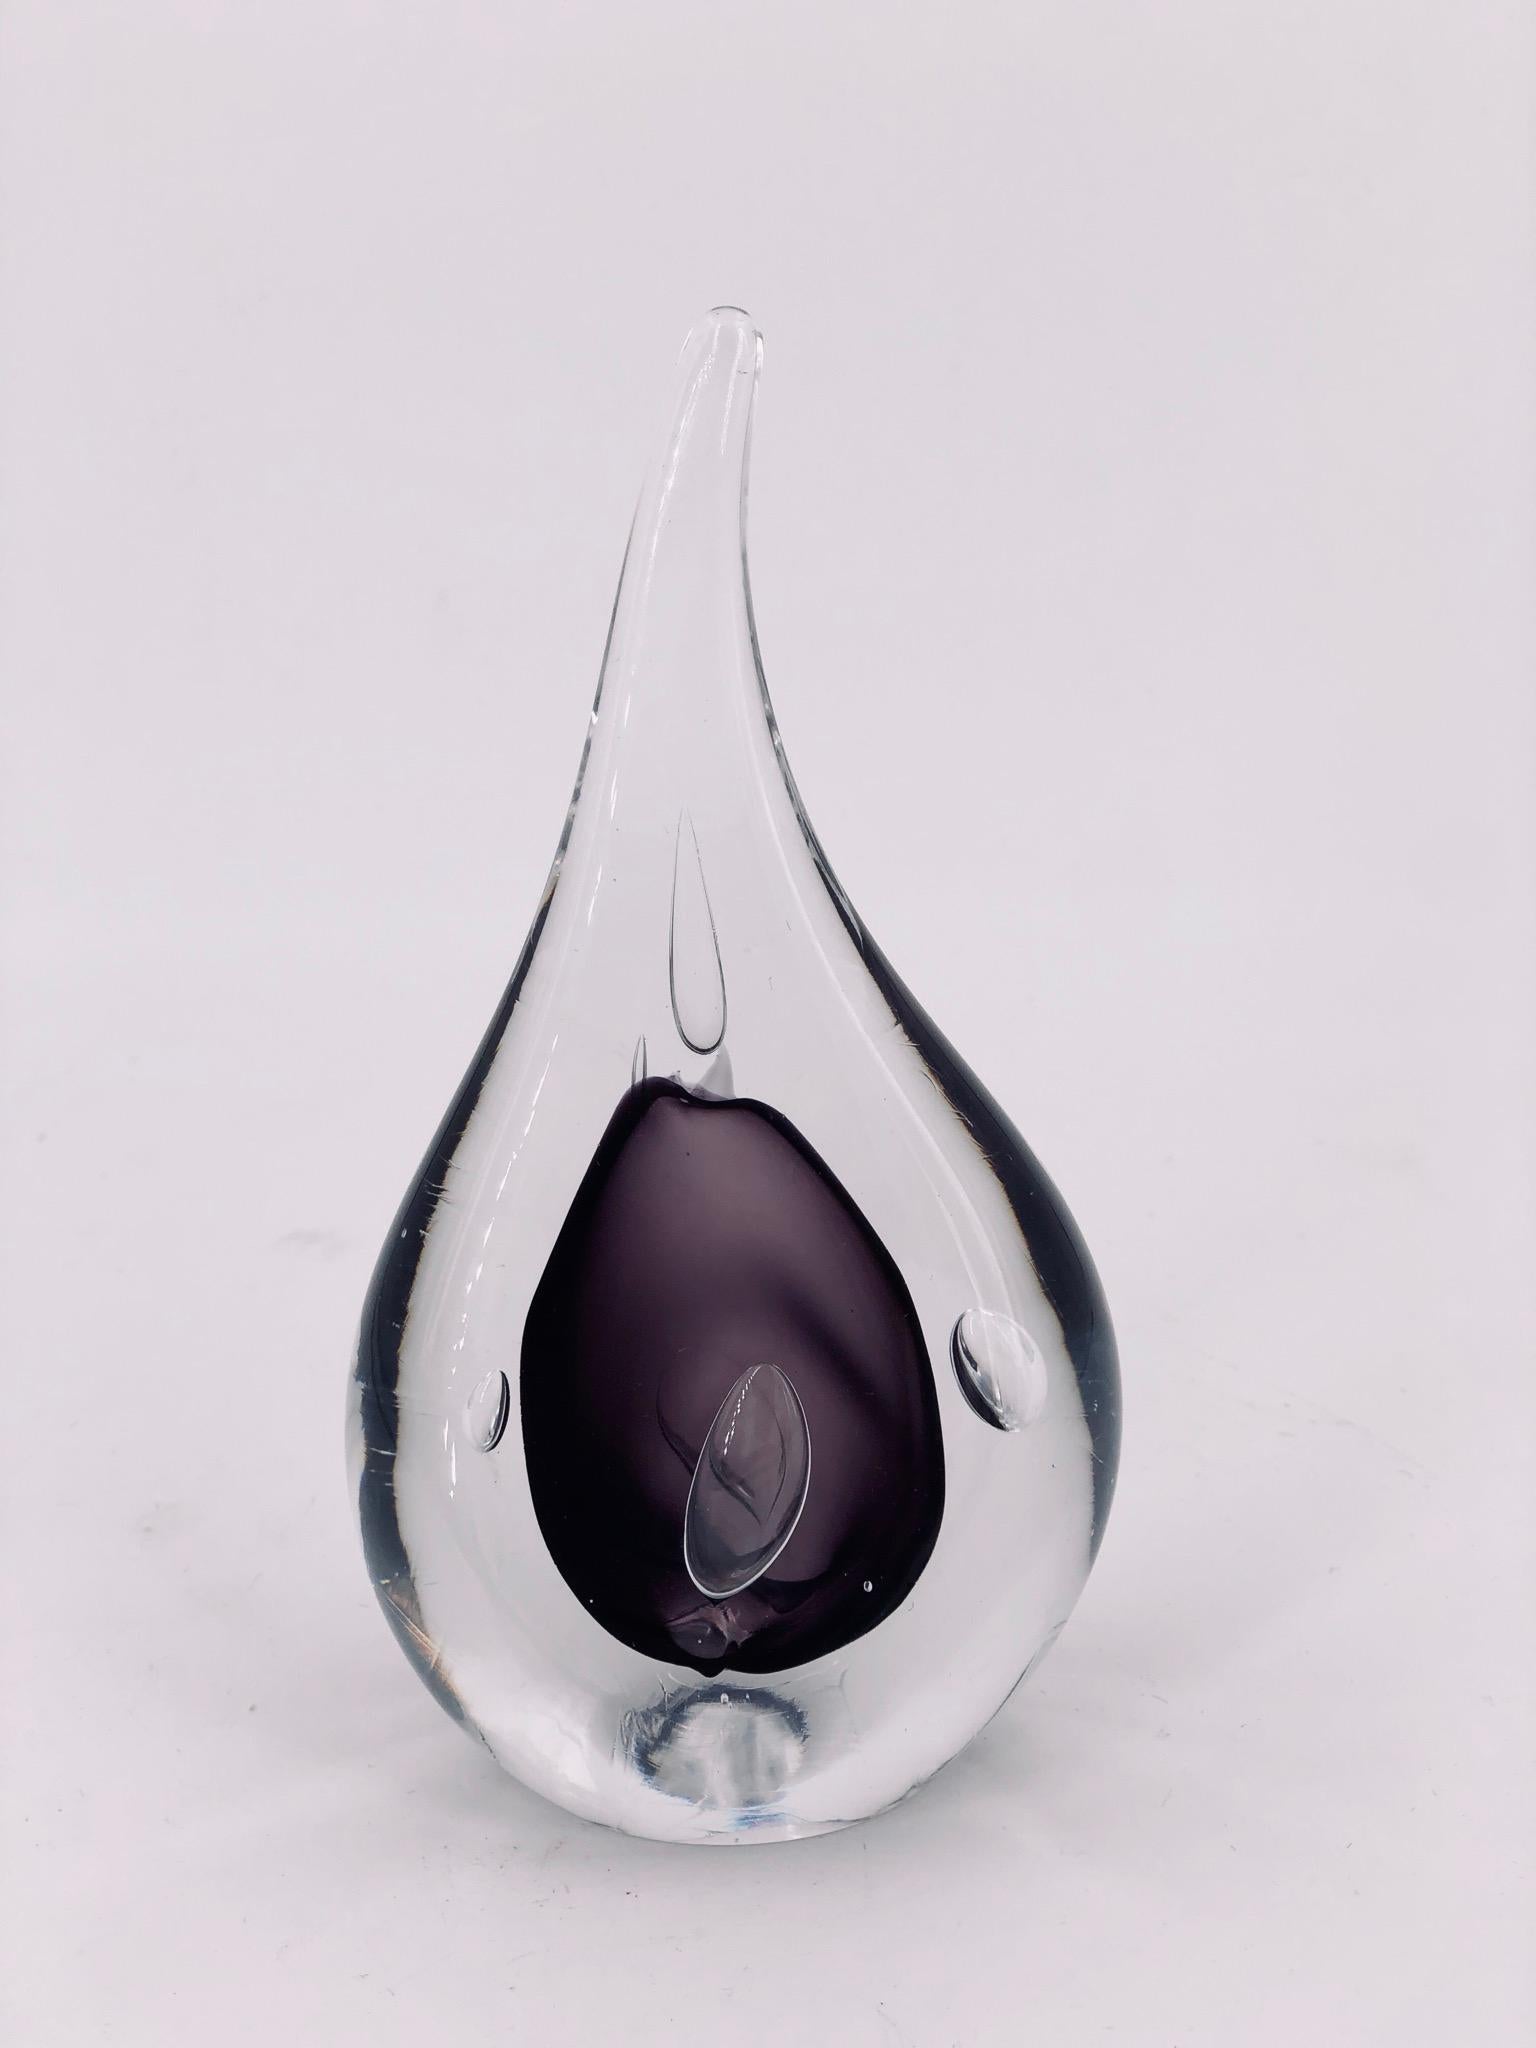 Beautiful teardrop glass sculpture beautiful colors and shape no chips or cracks signed at the bottom.
 